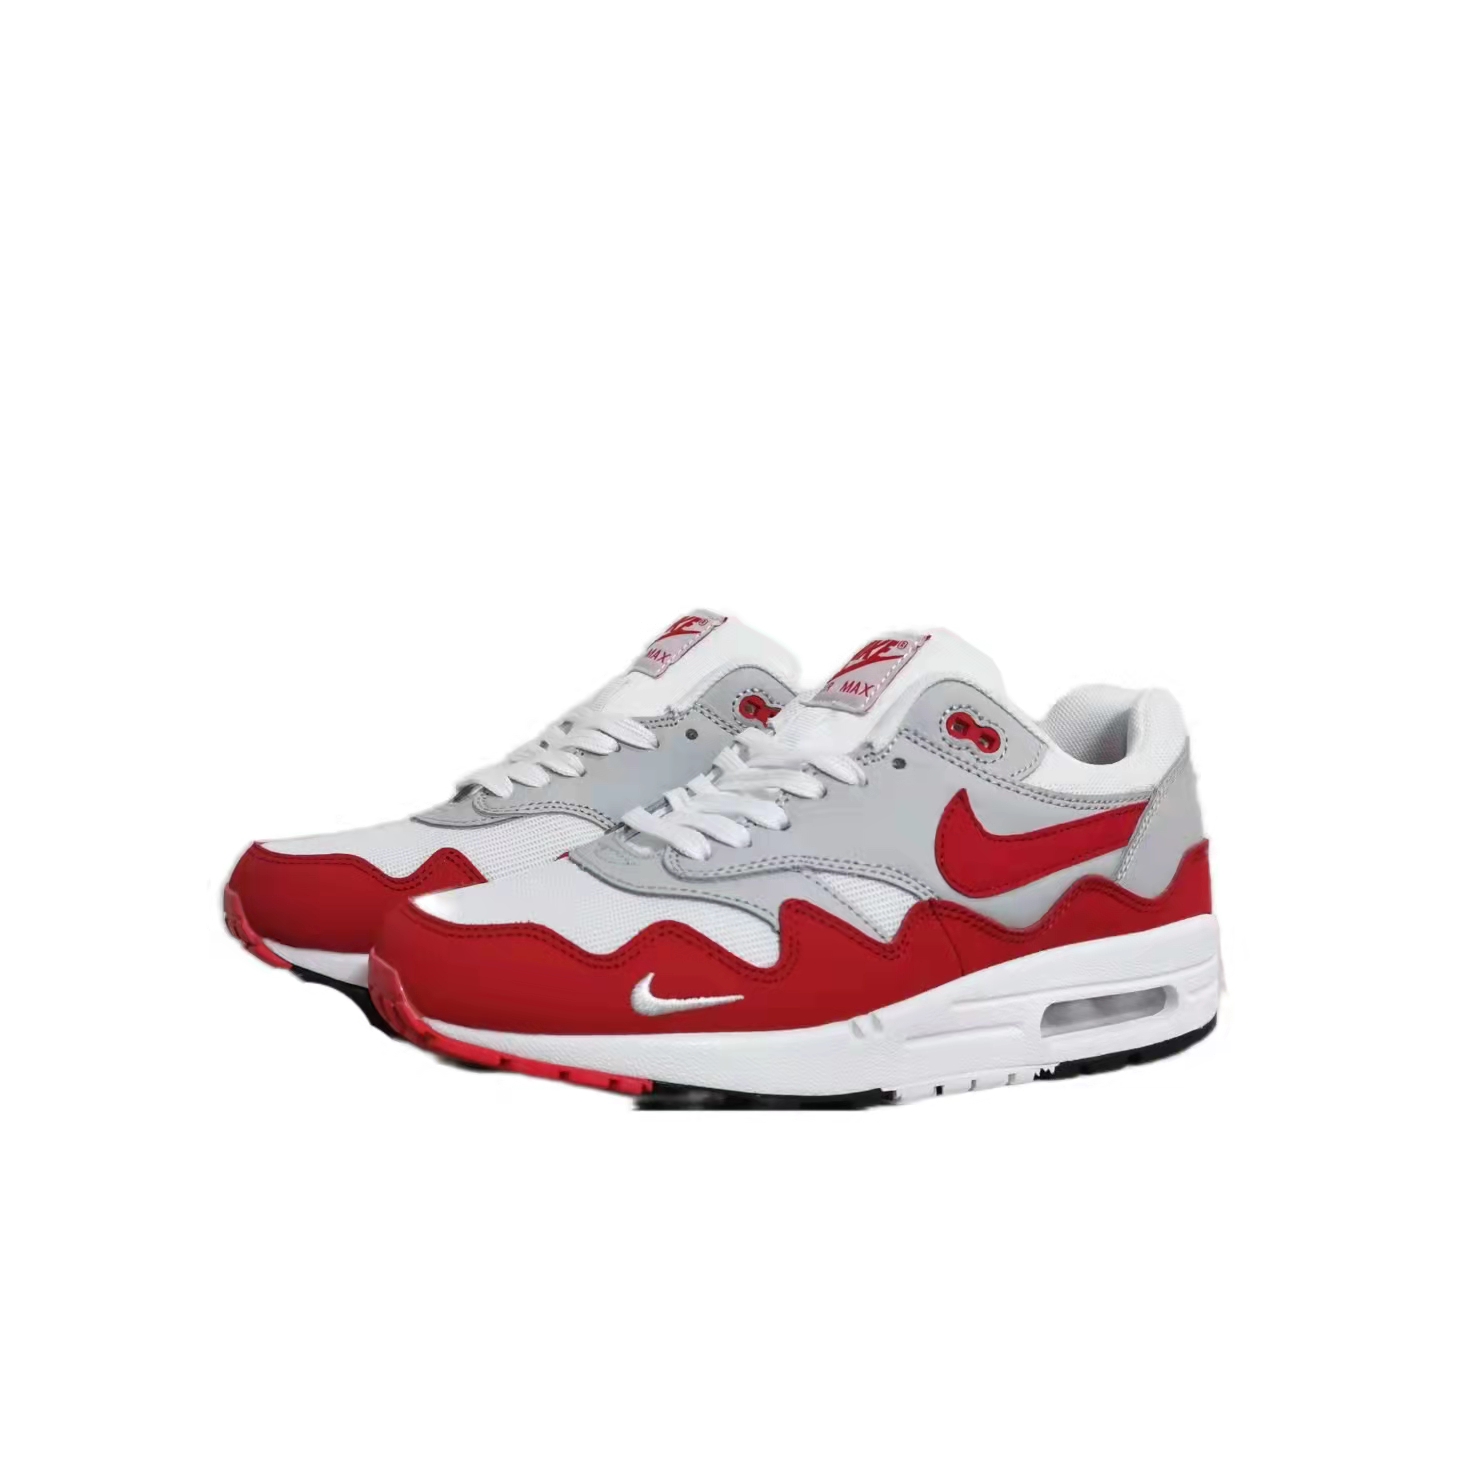 2021 Nike Air Max 87 White Grey Red Shoes - Click Image to Close